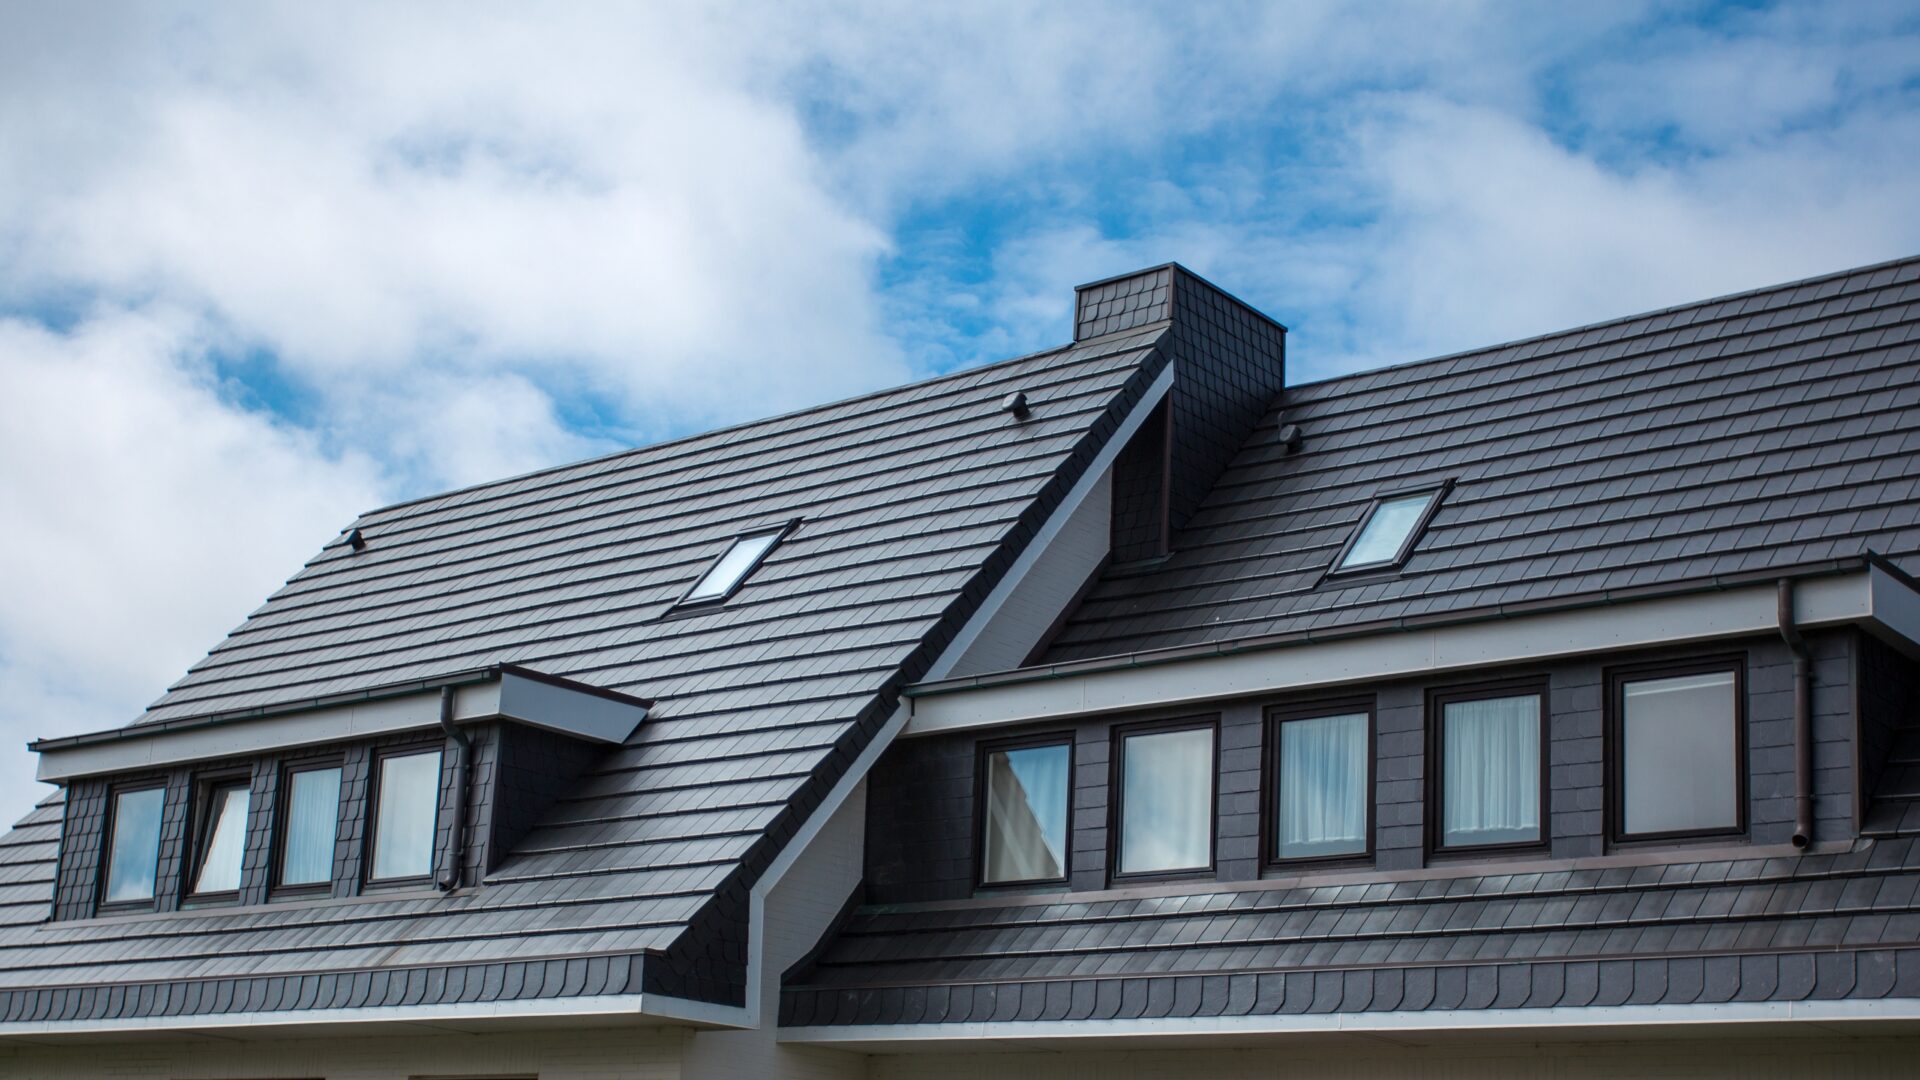 An black tile roof with a dormer window and two skylights